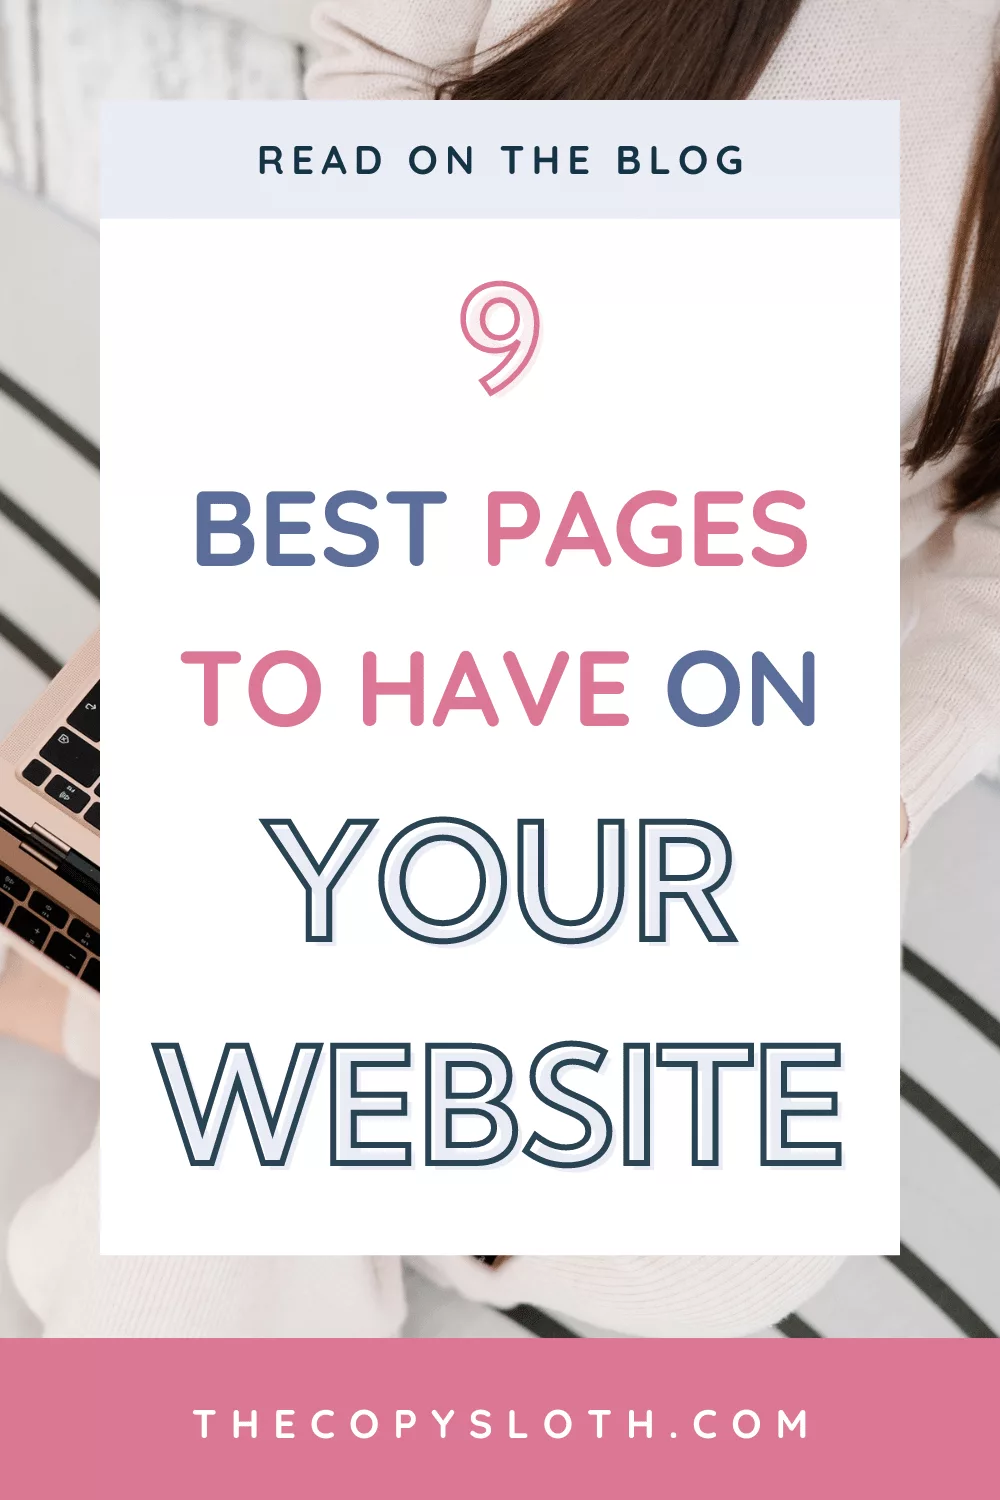 9 best pages to have on your website